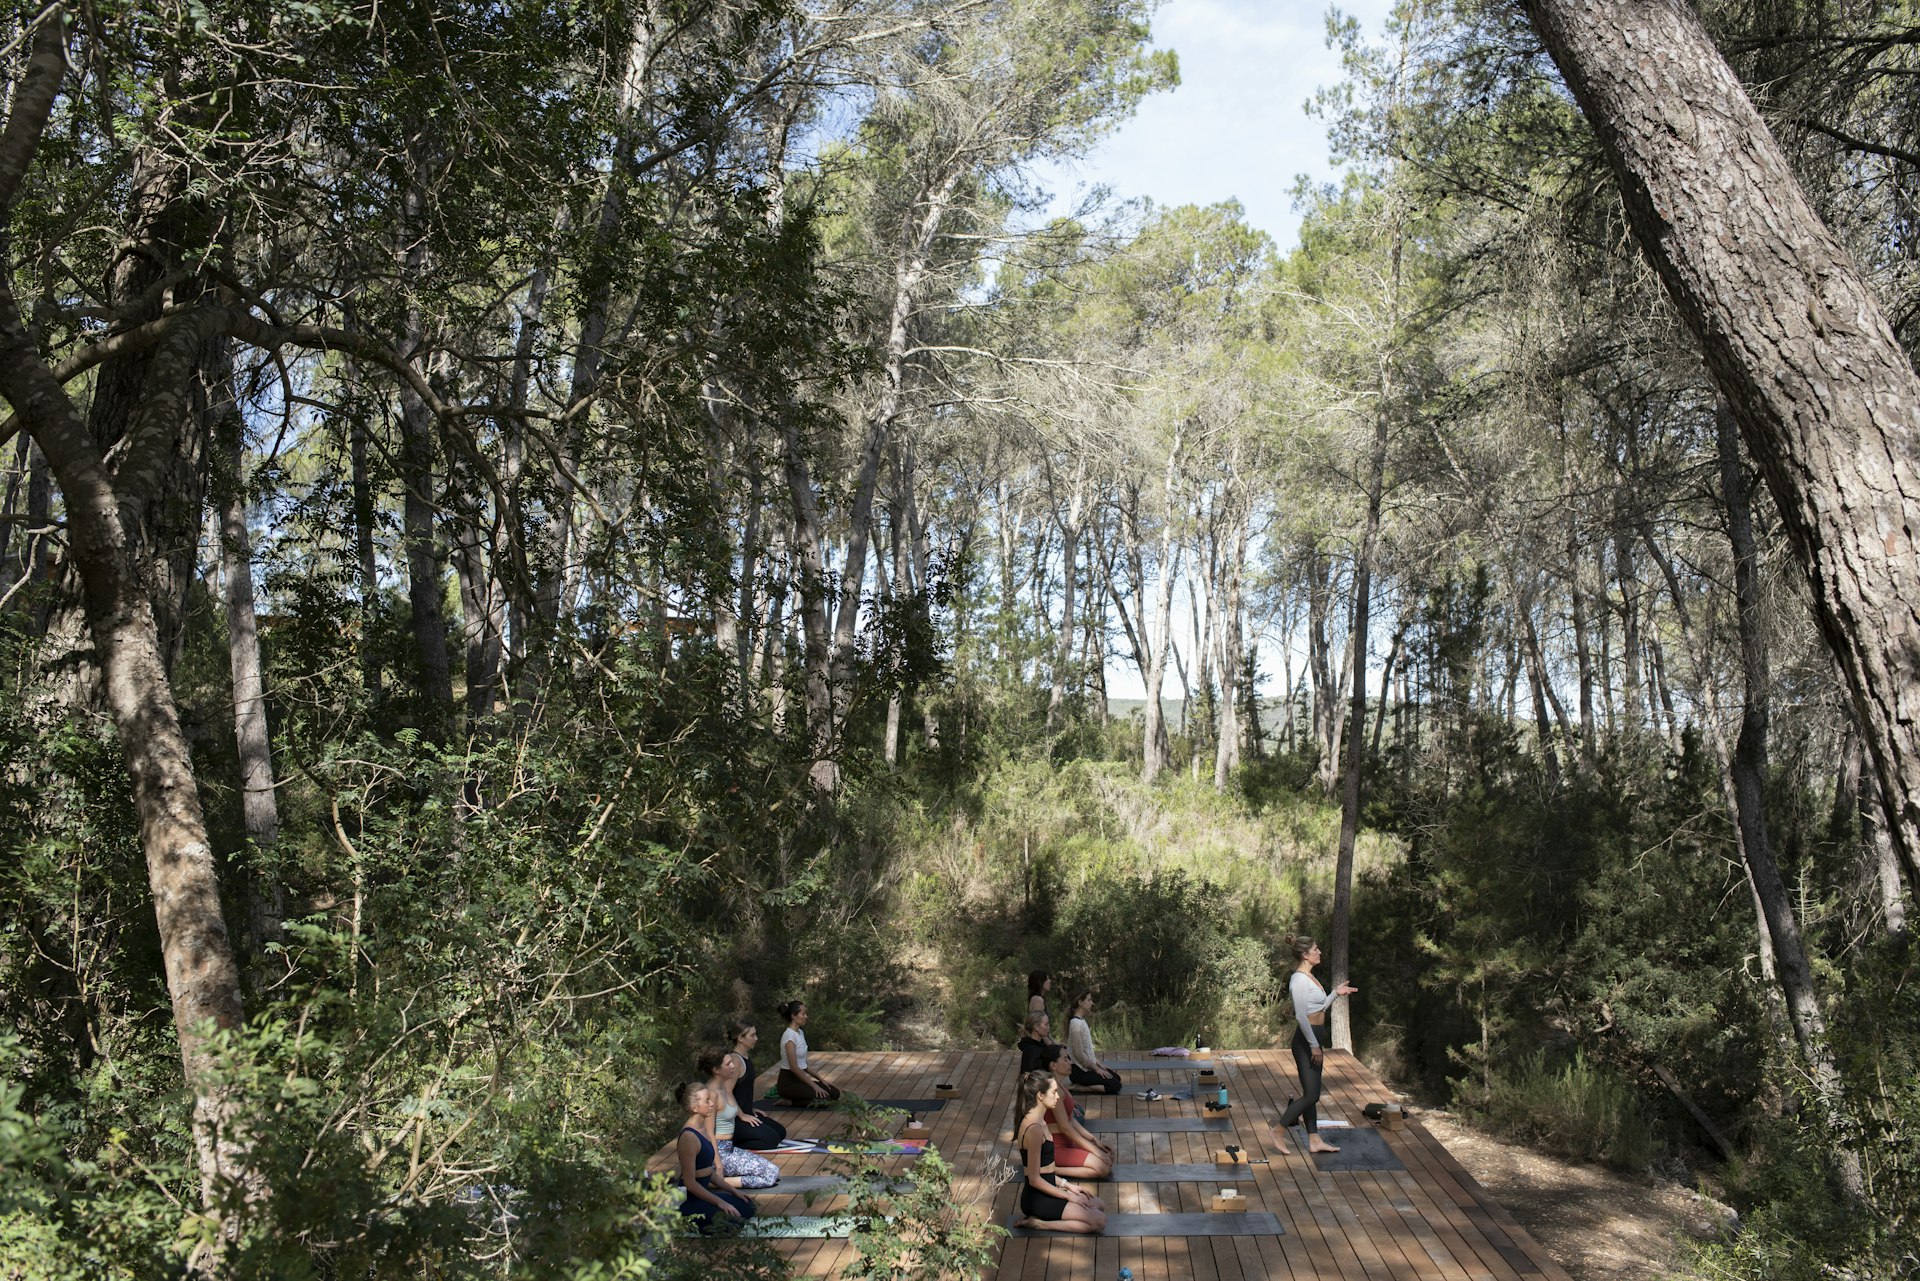 A group of people practicing yoga on a wooden deck in a forest setting, surrounded by tall trees and lush greenery.